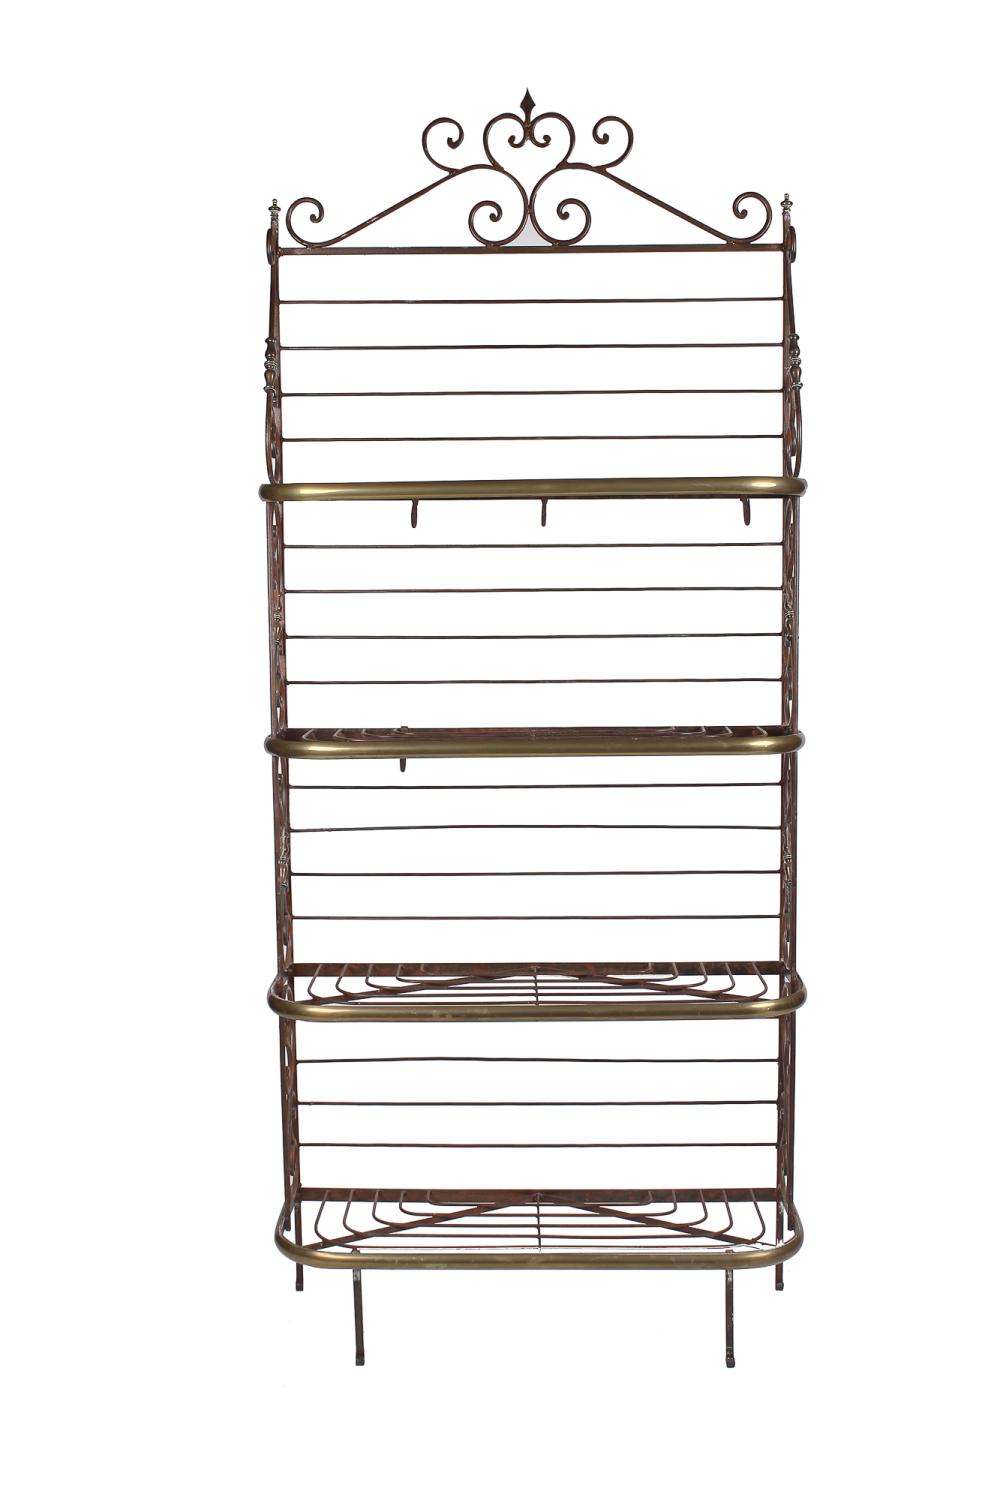 IRON BRASS FRENCH BAKERS RACKwith 3363ec